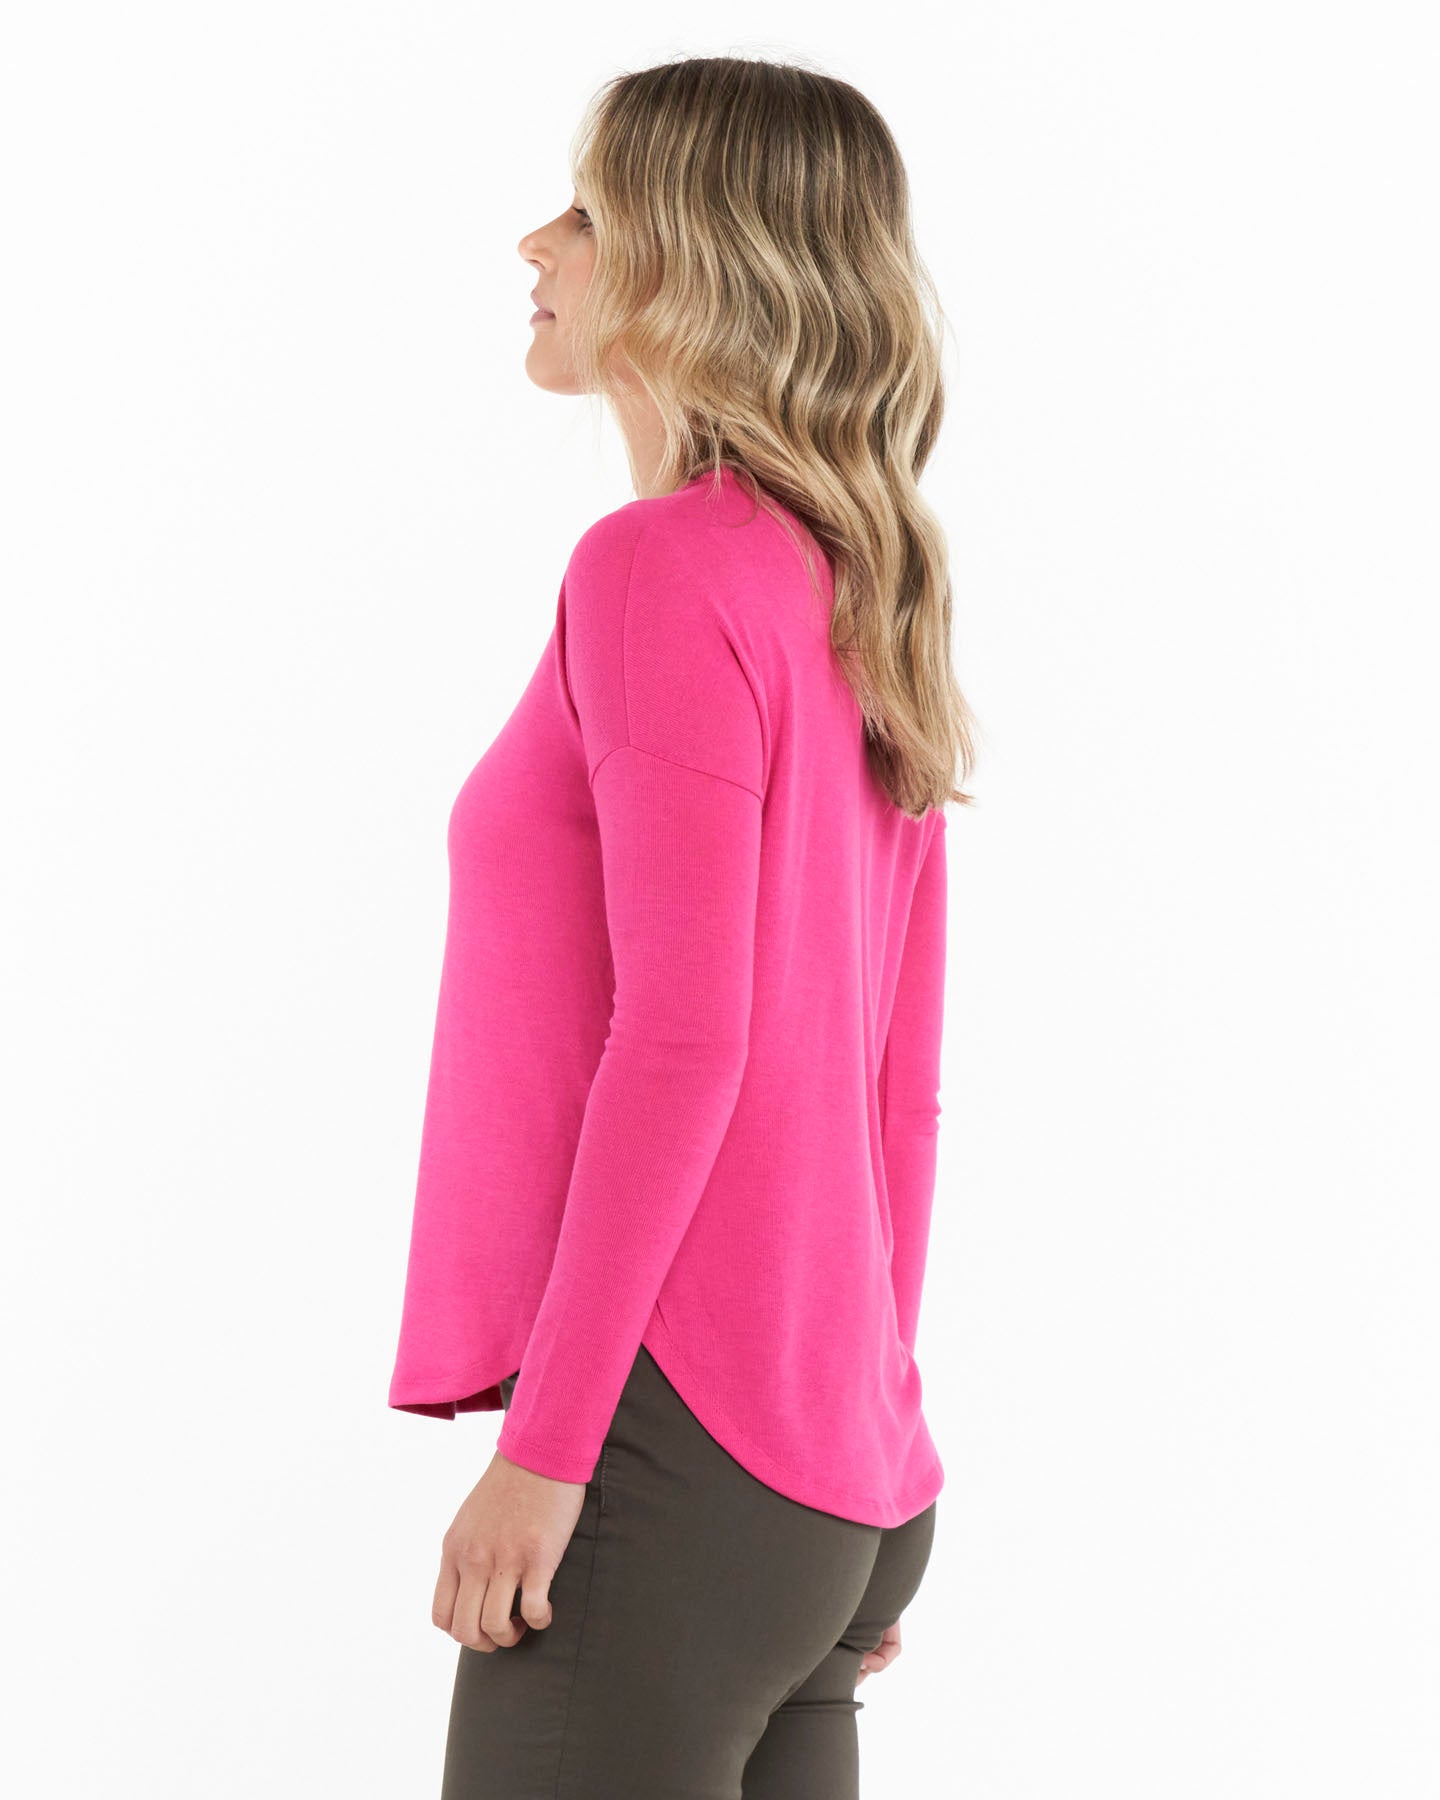 Polly Texture Long Sleeve Tee - Cherry Pink